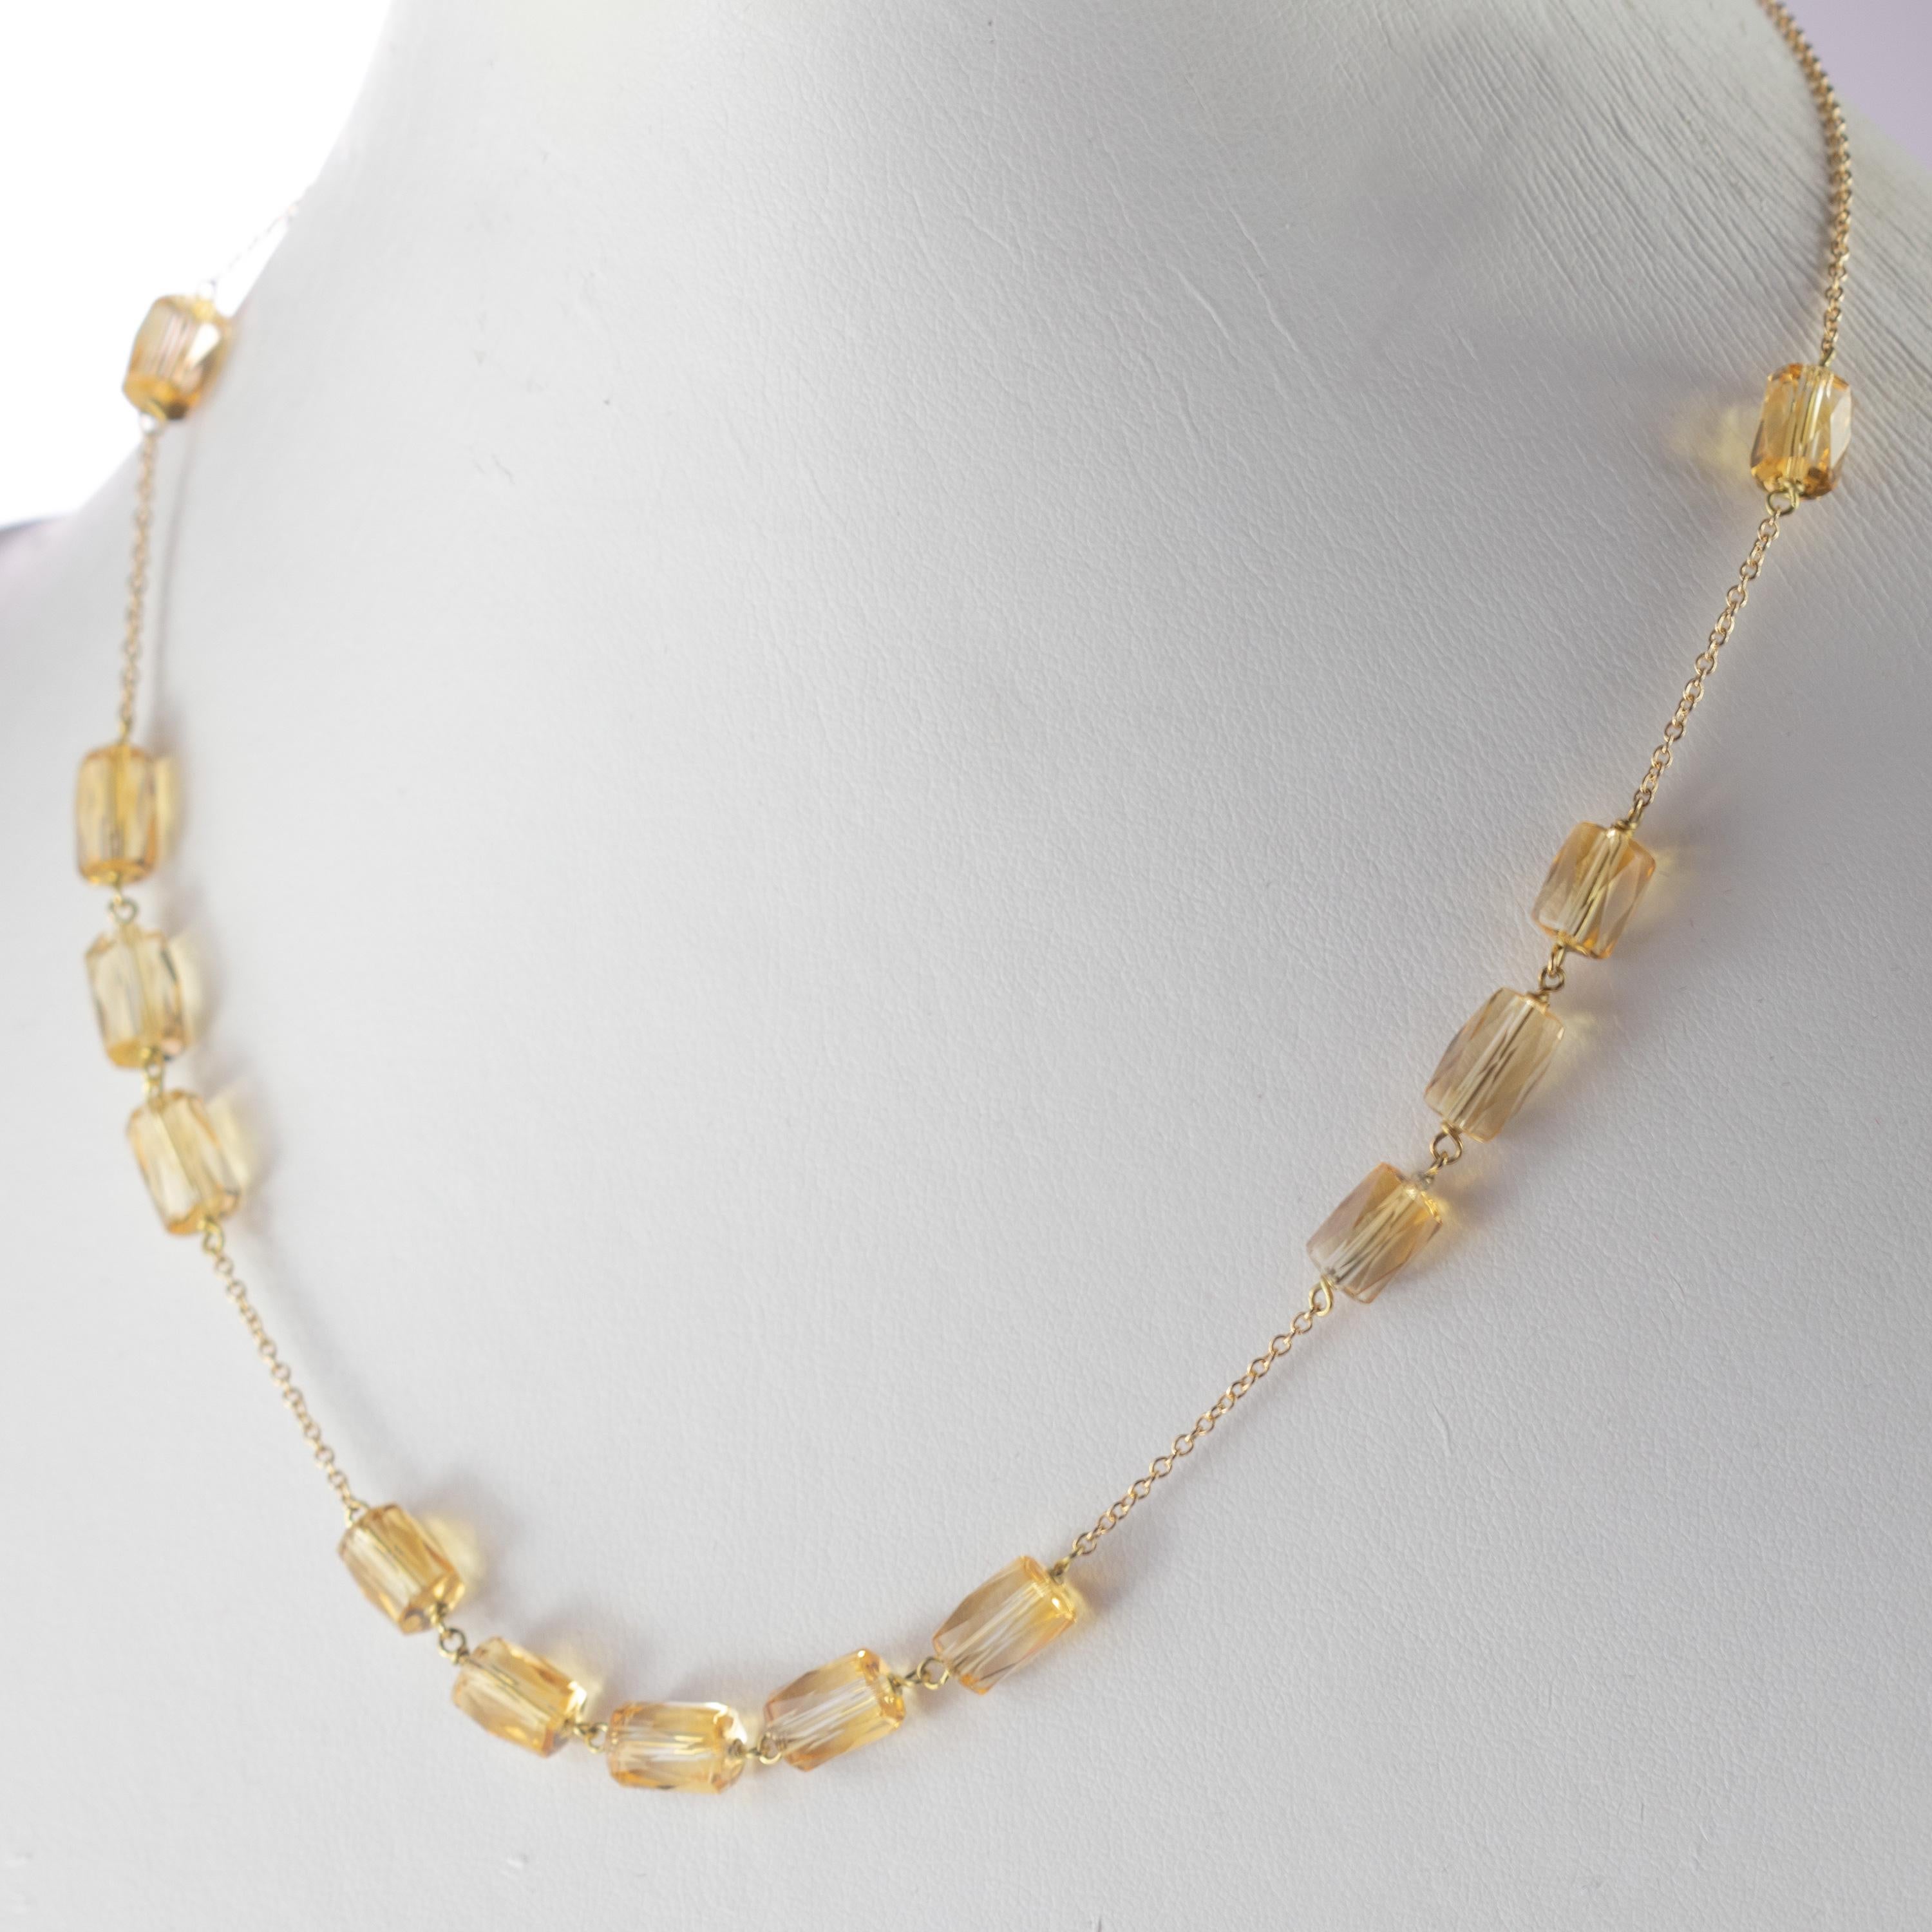 Intini Jewels Citrine Tubets Beads 9 Karat Yellow Gold Chain Handmade Necklace For Sale 3